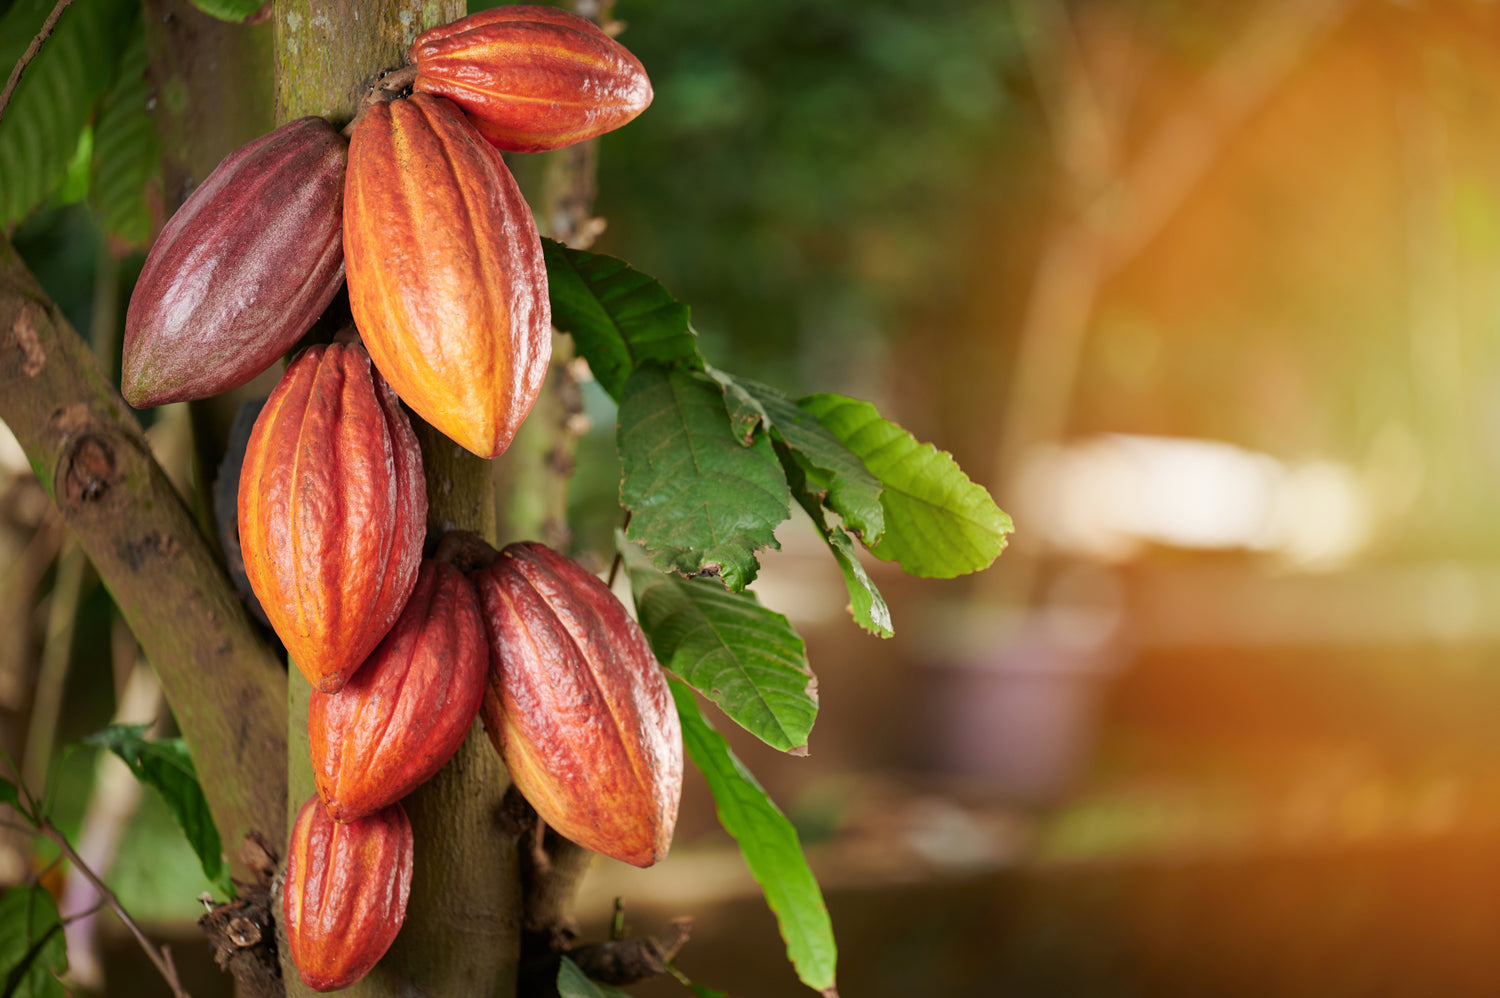 Cacao Tree whit big red bean, to depic the benefits of Cacao